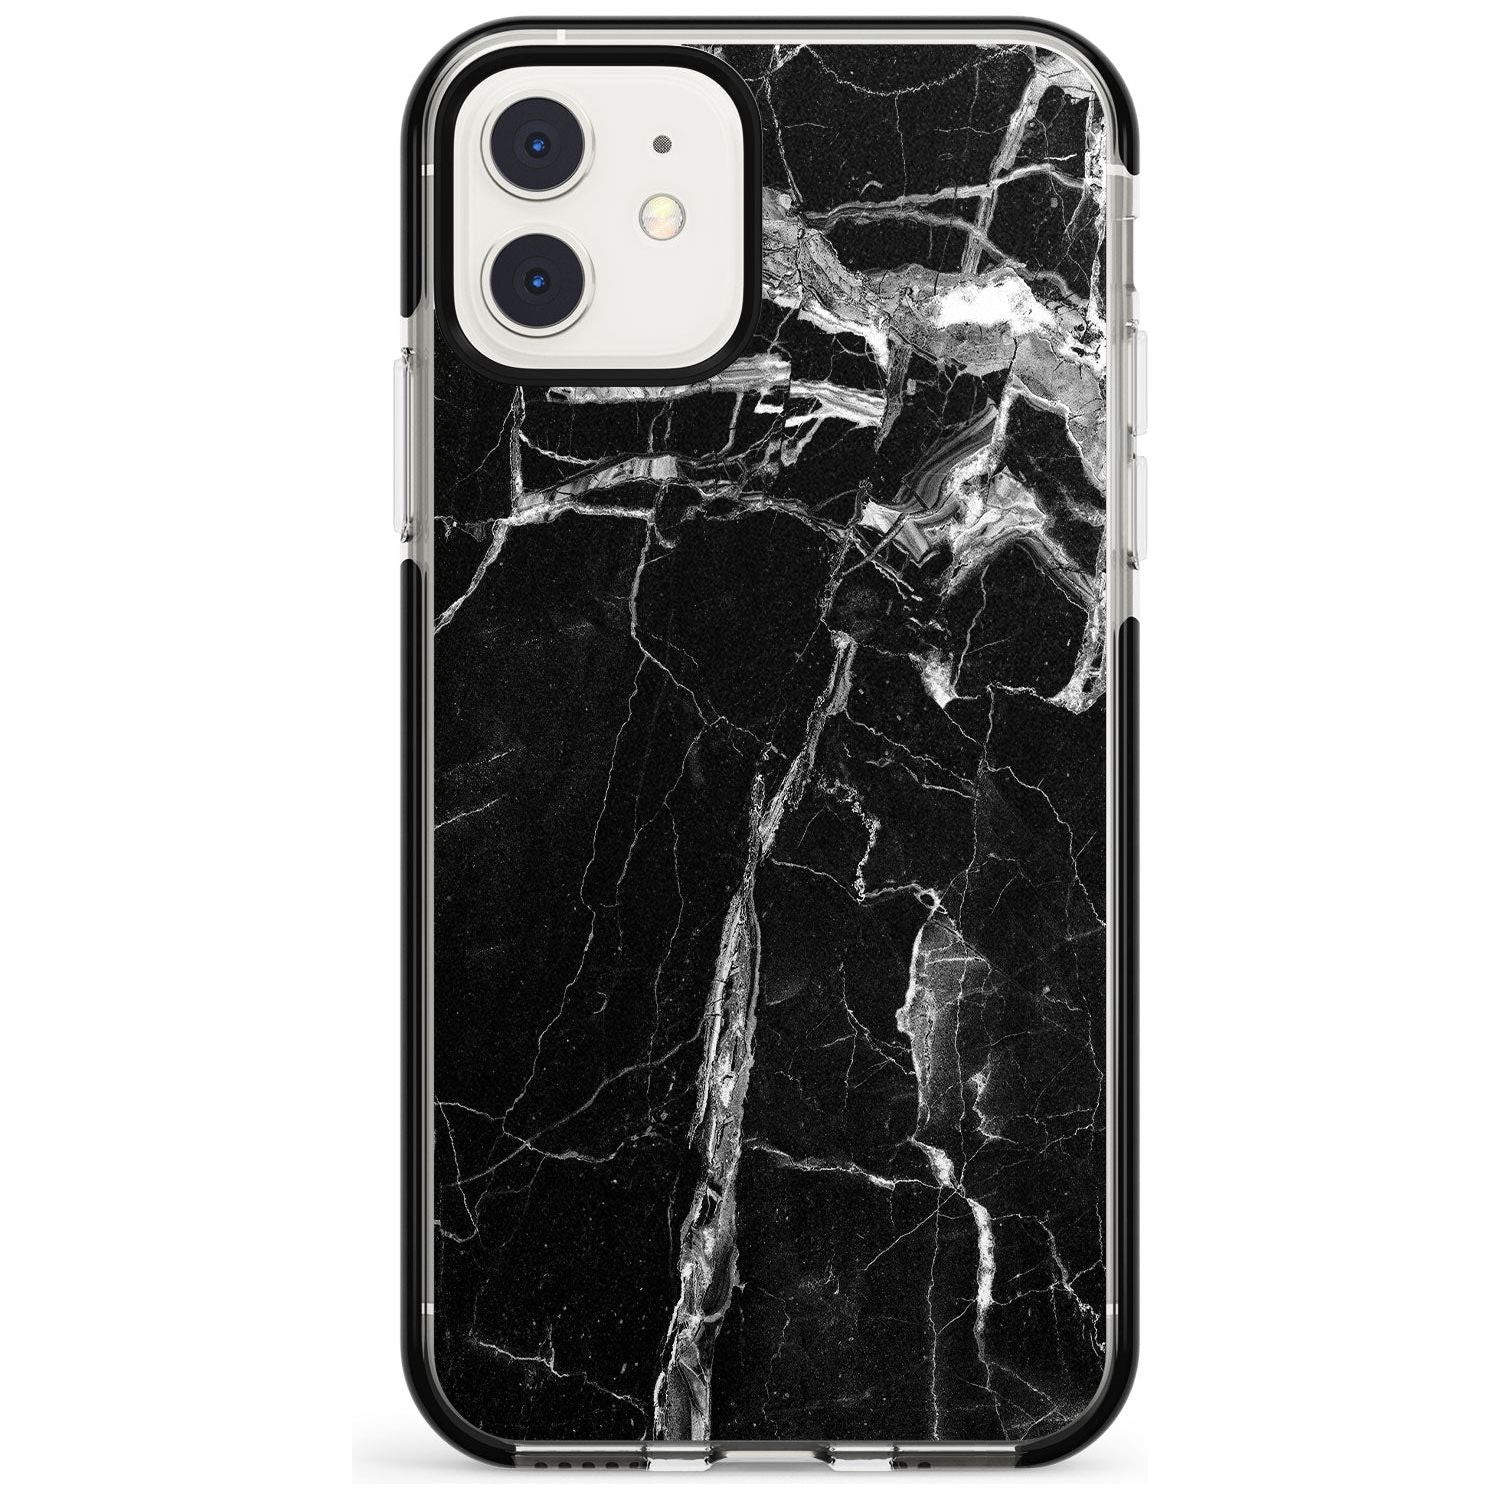 Black Onyx Marble Texture Pink Fade Impact Phone Case for iPhone 11 Pro Max